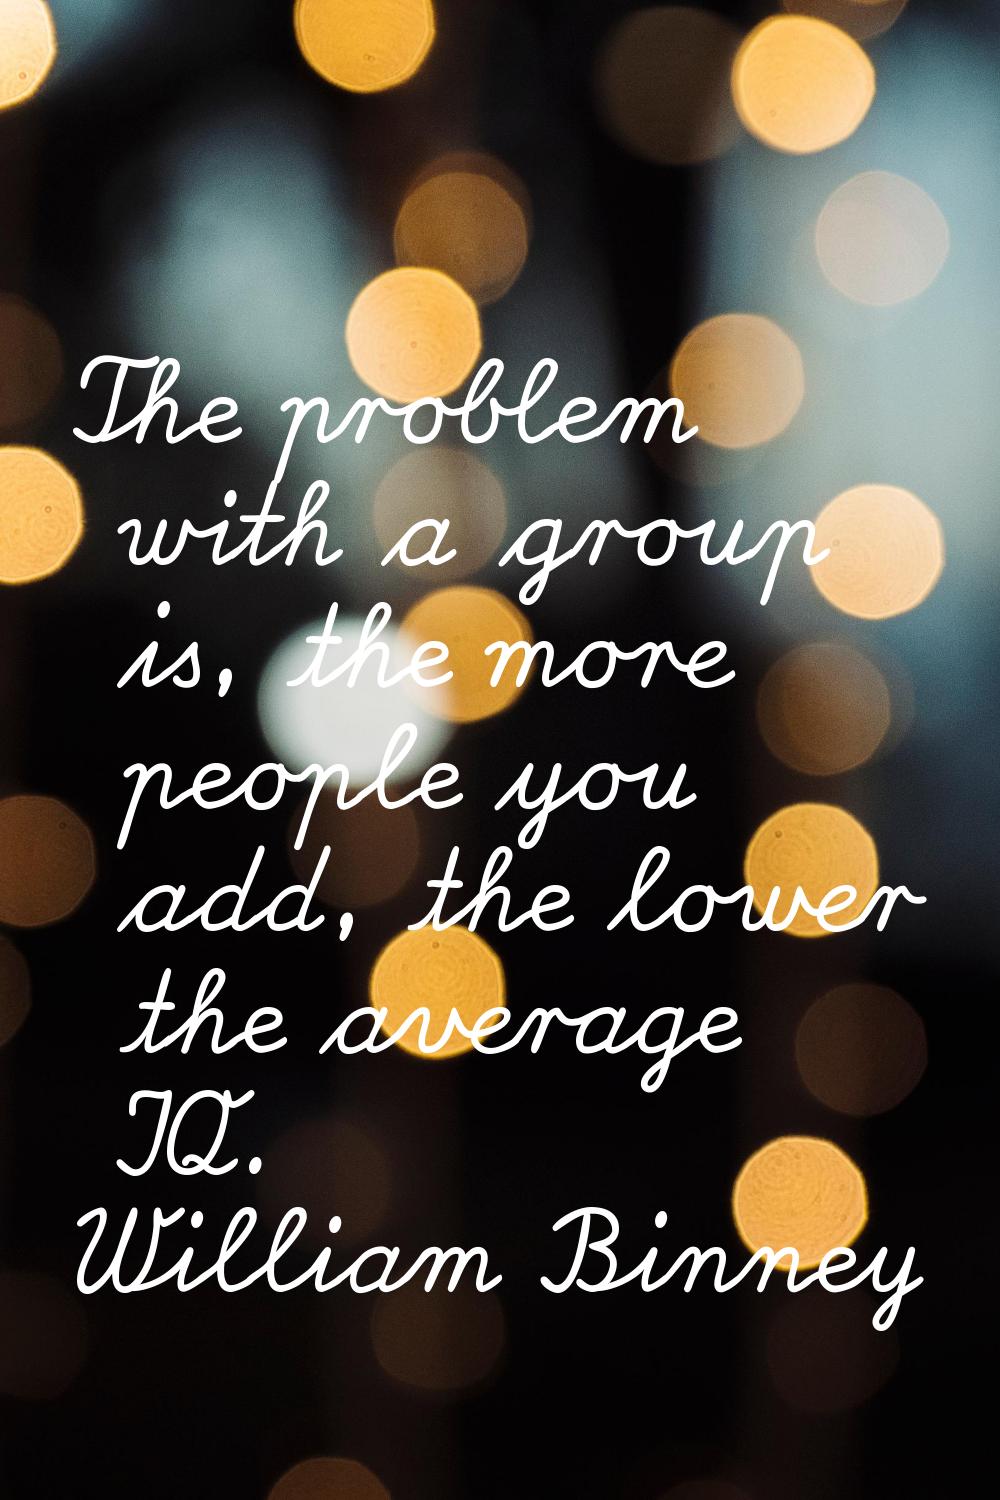 The problem with a group is, the more people you add, the lower the average IQ.